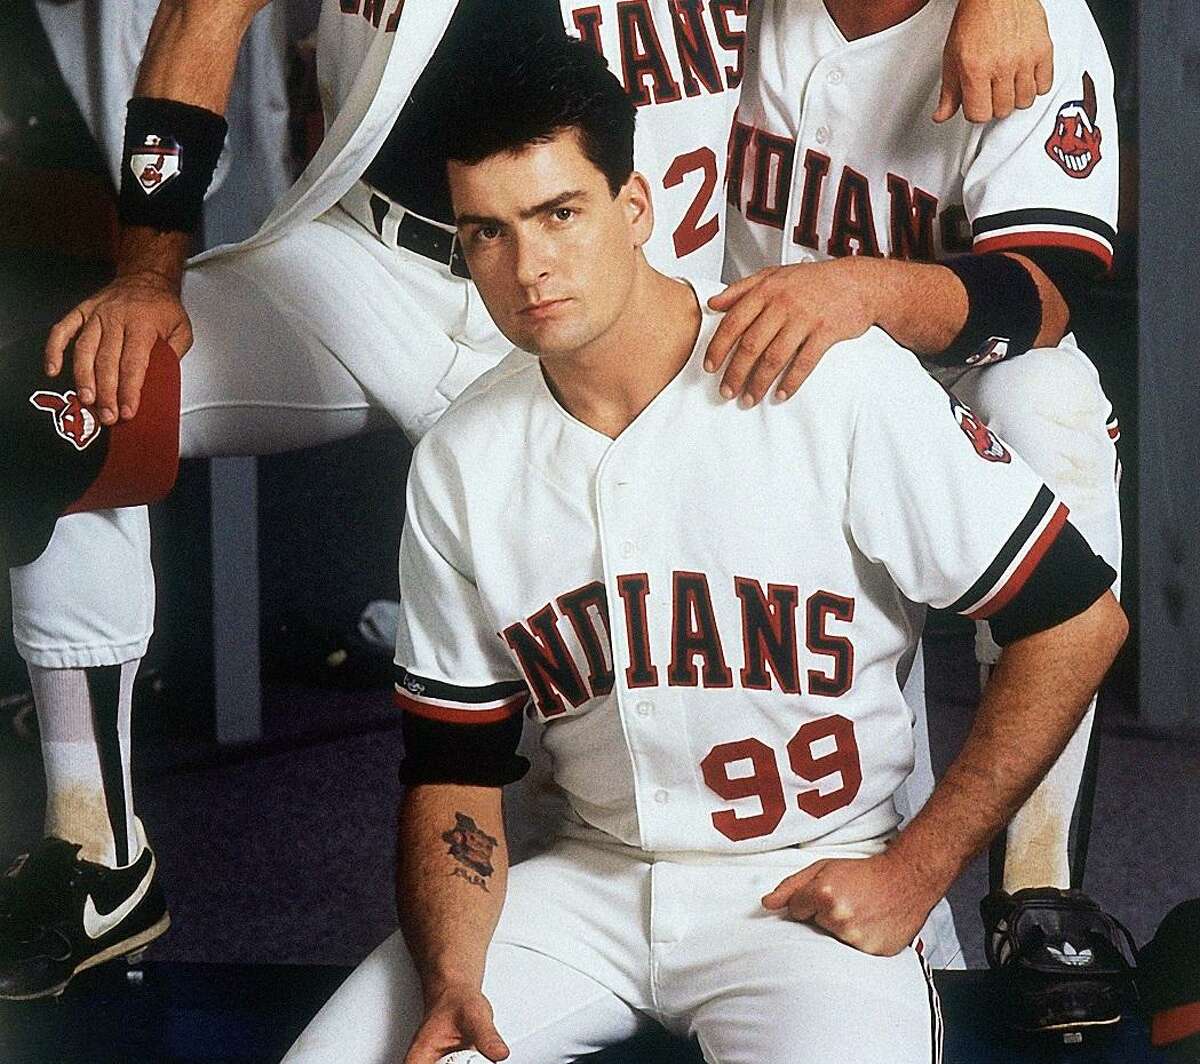 In this image provided by Paramount Pictures, Tom Berenger, right, plays Cleveland Indians catcher Jake Taylor, Charlie Sheen, below, is the team's pitcher Ackie Vaughn, and Corbin Bemsen, above, plays third baseman Rodger Dom in the Paramount comedy "Major League" in 1989. (AP Photo/Paramount Pictures, Timothy White) NO SALES